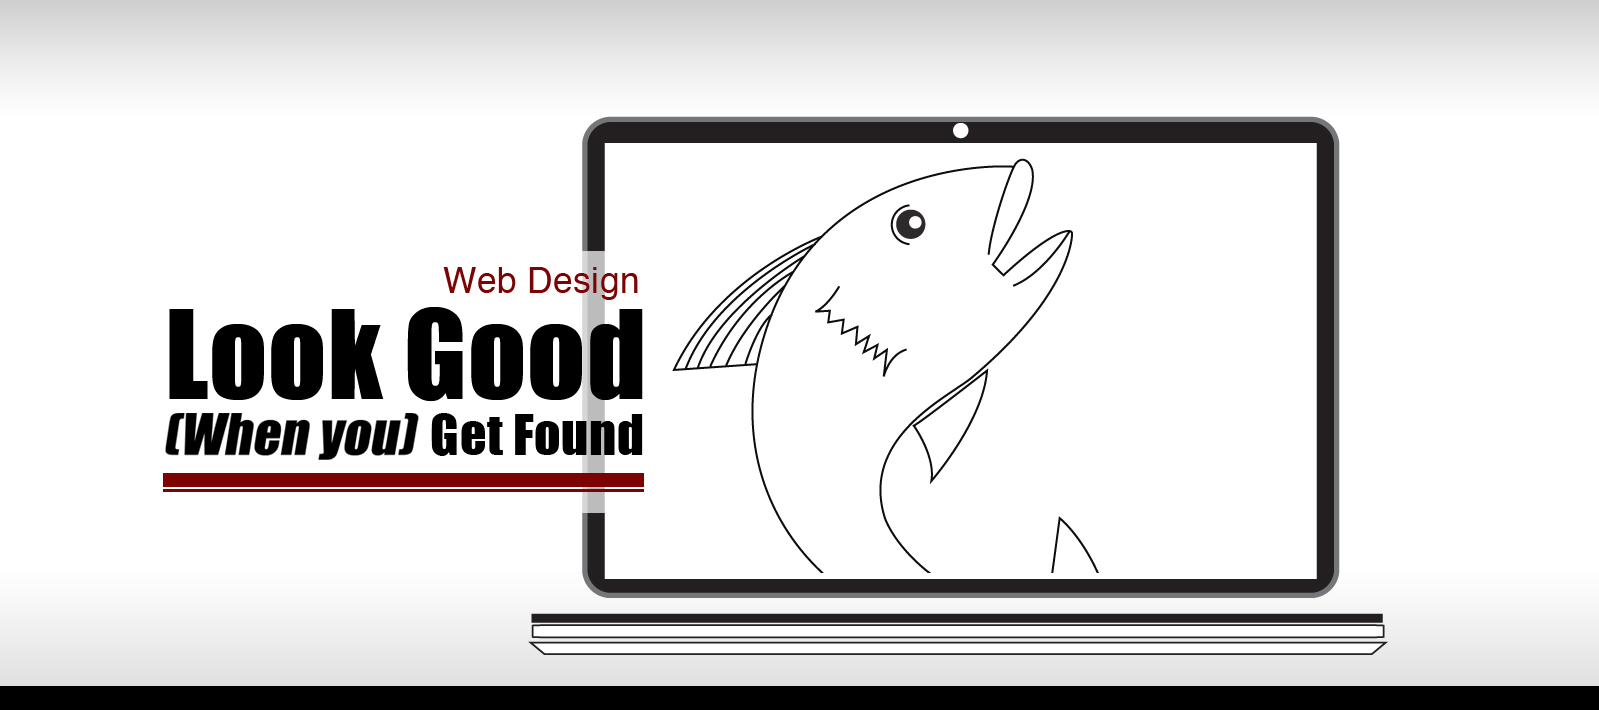 Web Design by Thirsty Fish Graphic Design